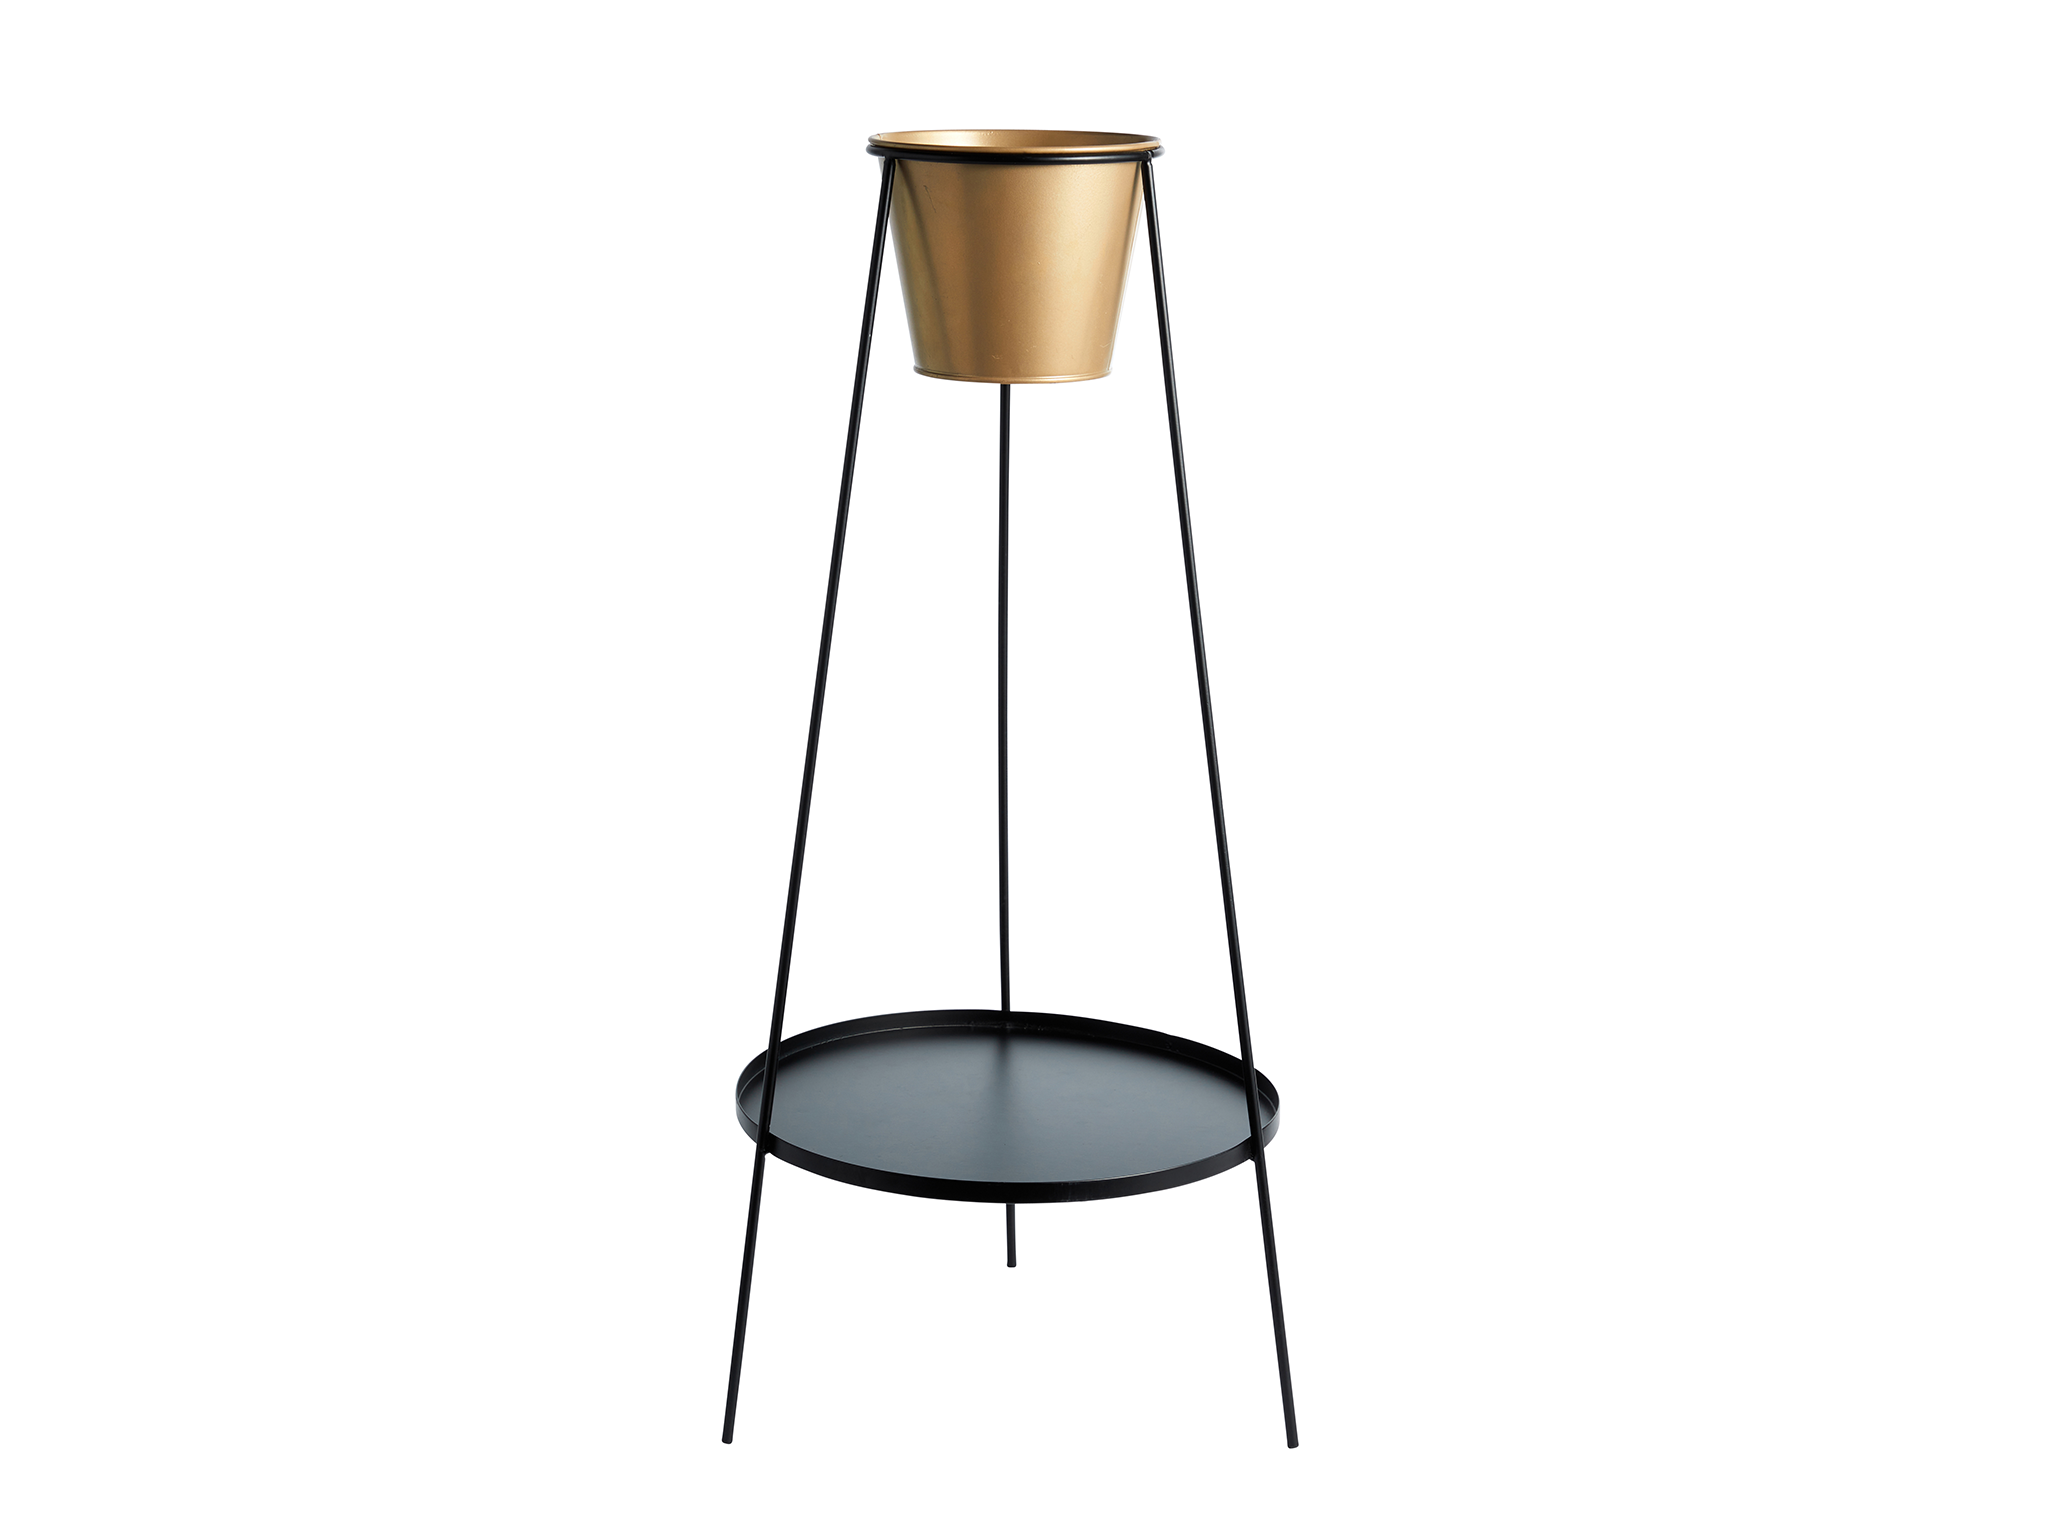 Dunelm metal plant stand with gold pot